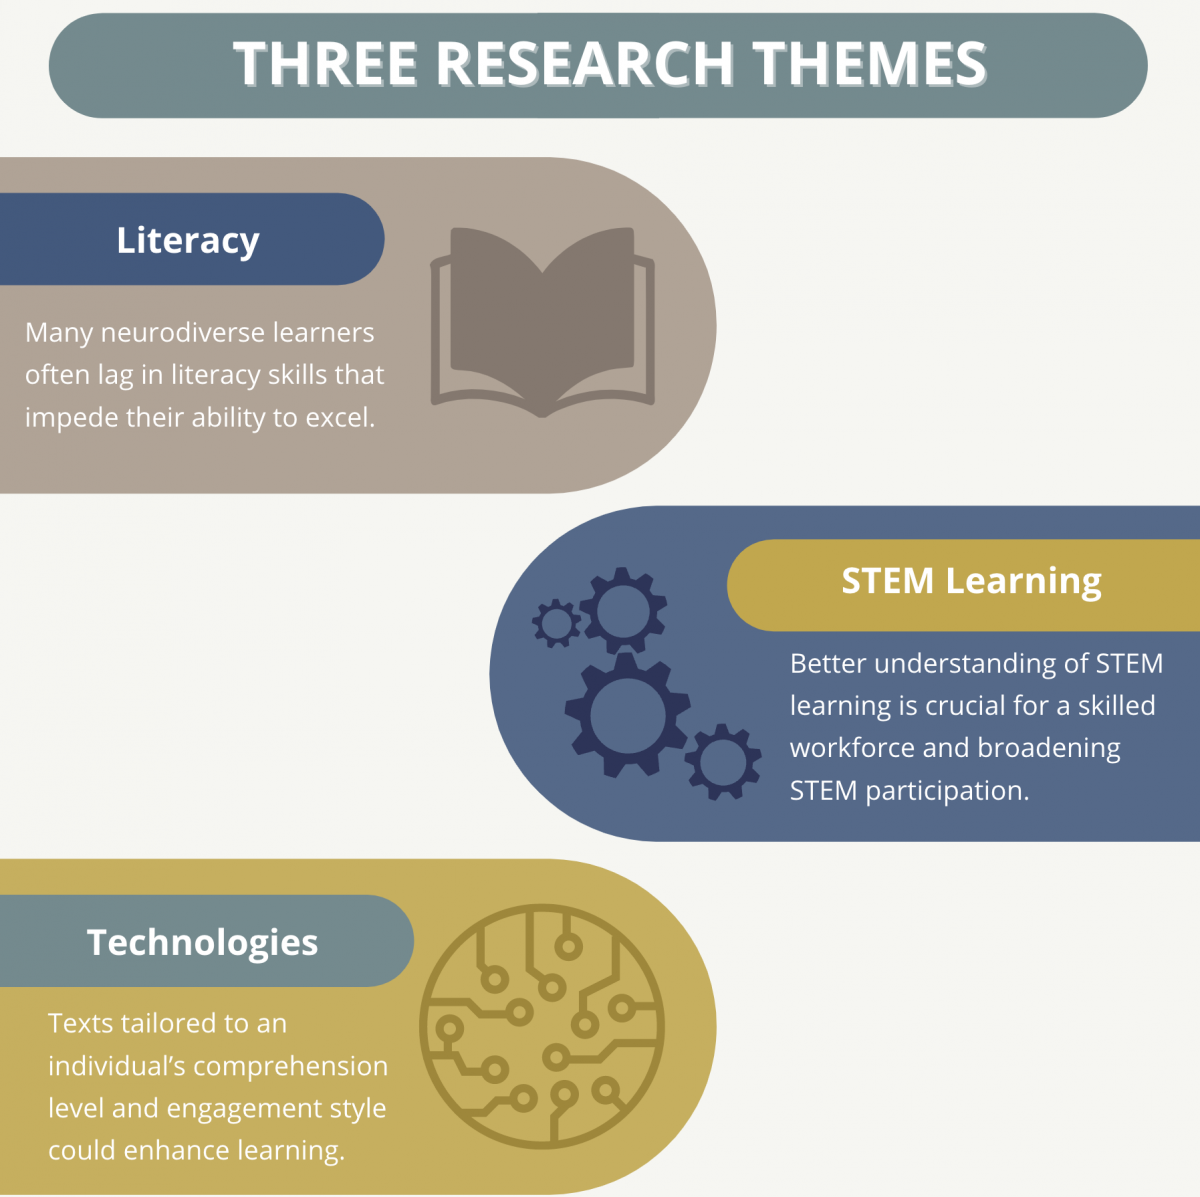 TRANSCEND's Research Themes: (1) Literacy, (2) STEM learning and (3) Technology